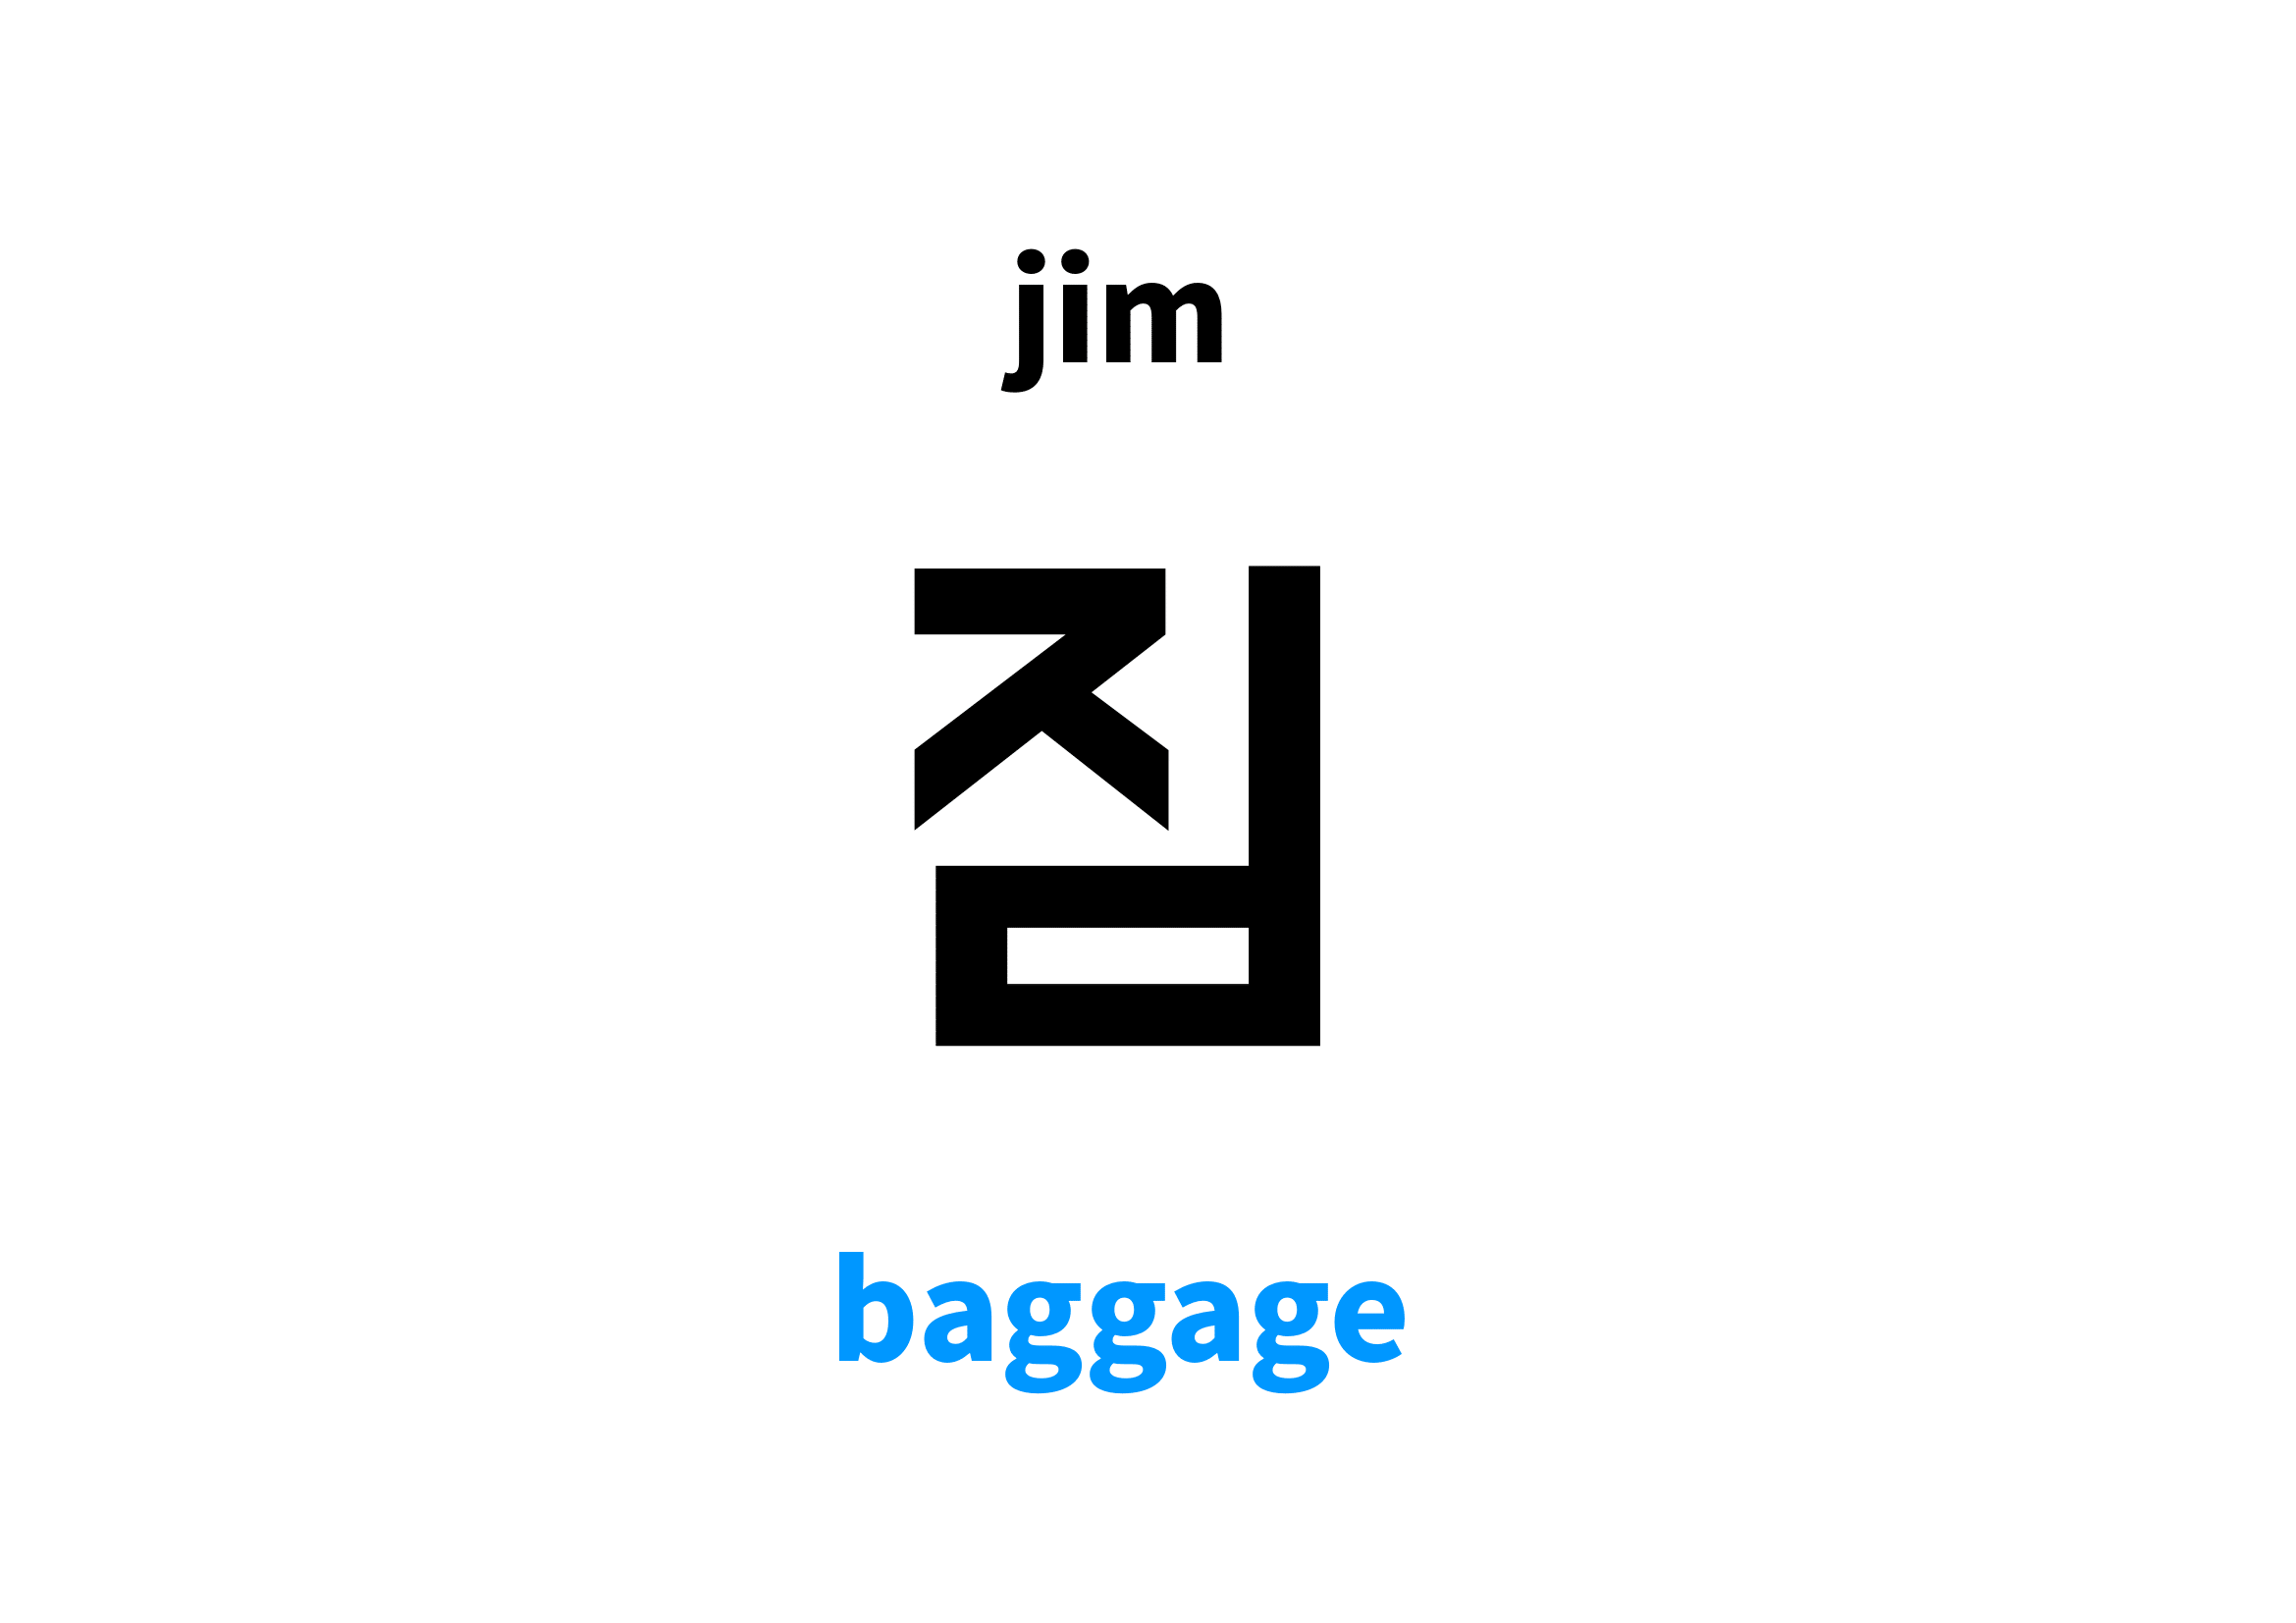 Baggage in Korean, 짐 meaning